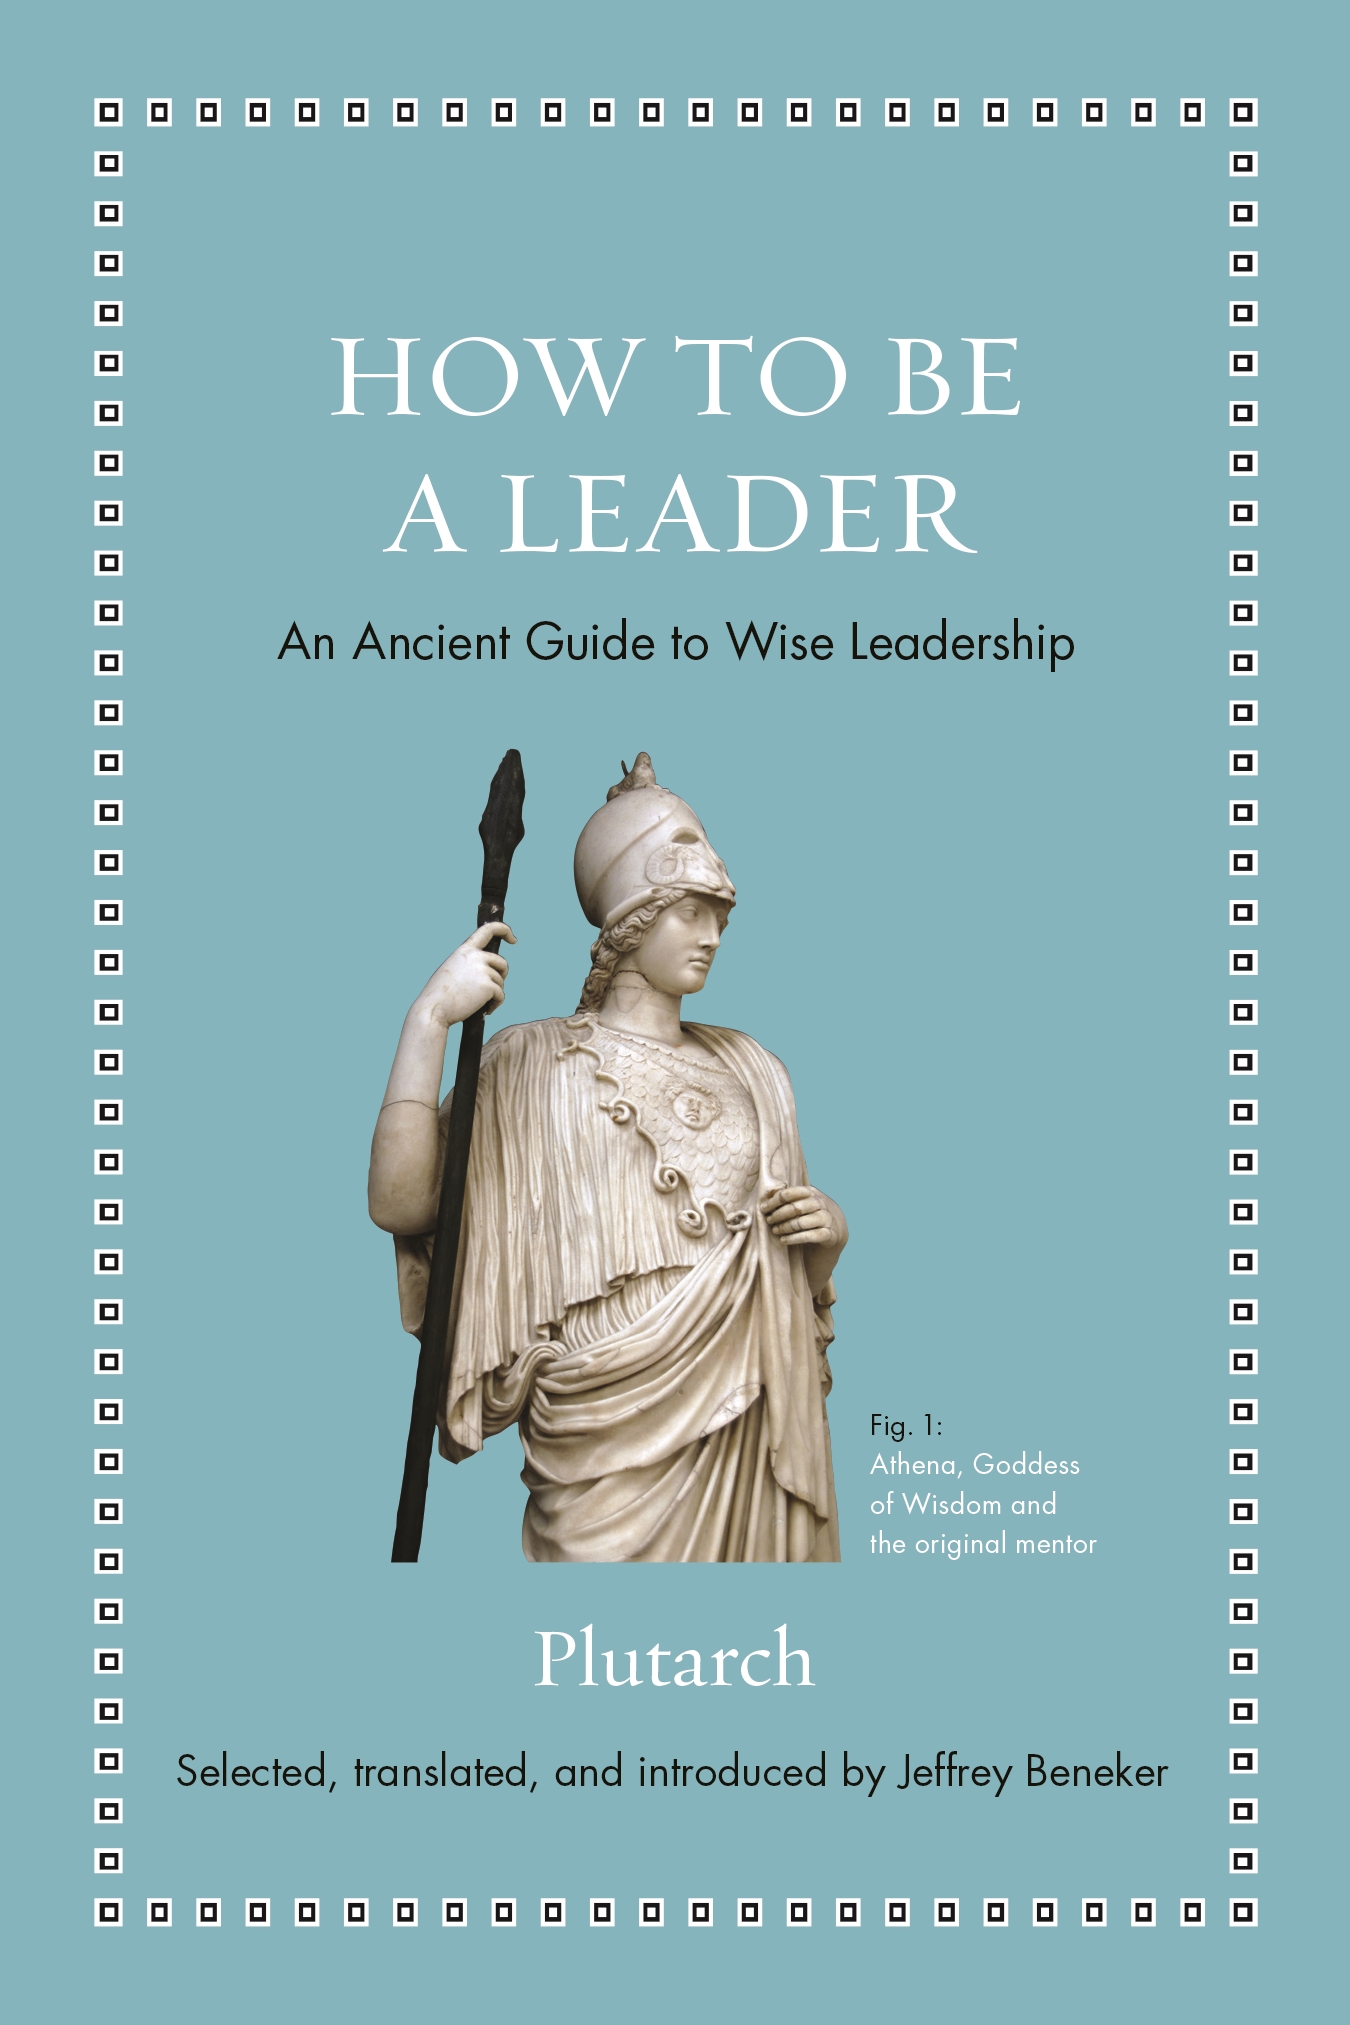 How to Be a Leader  Princeton University Press